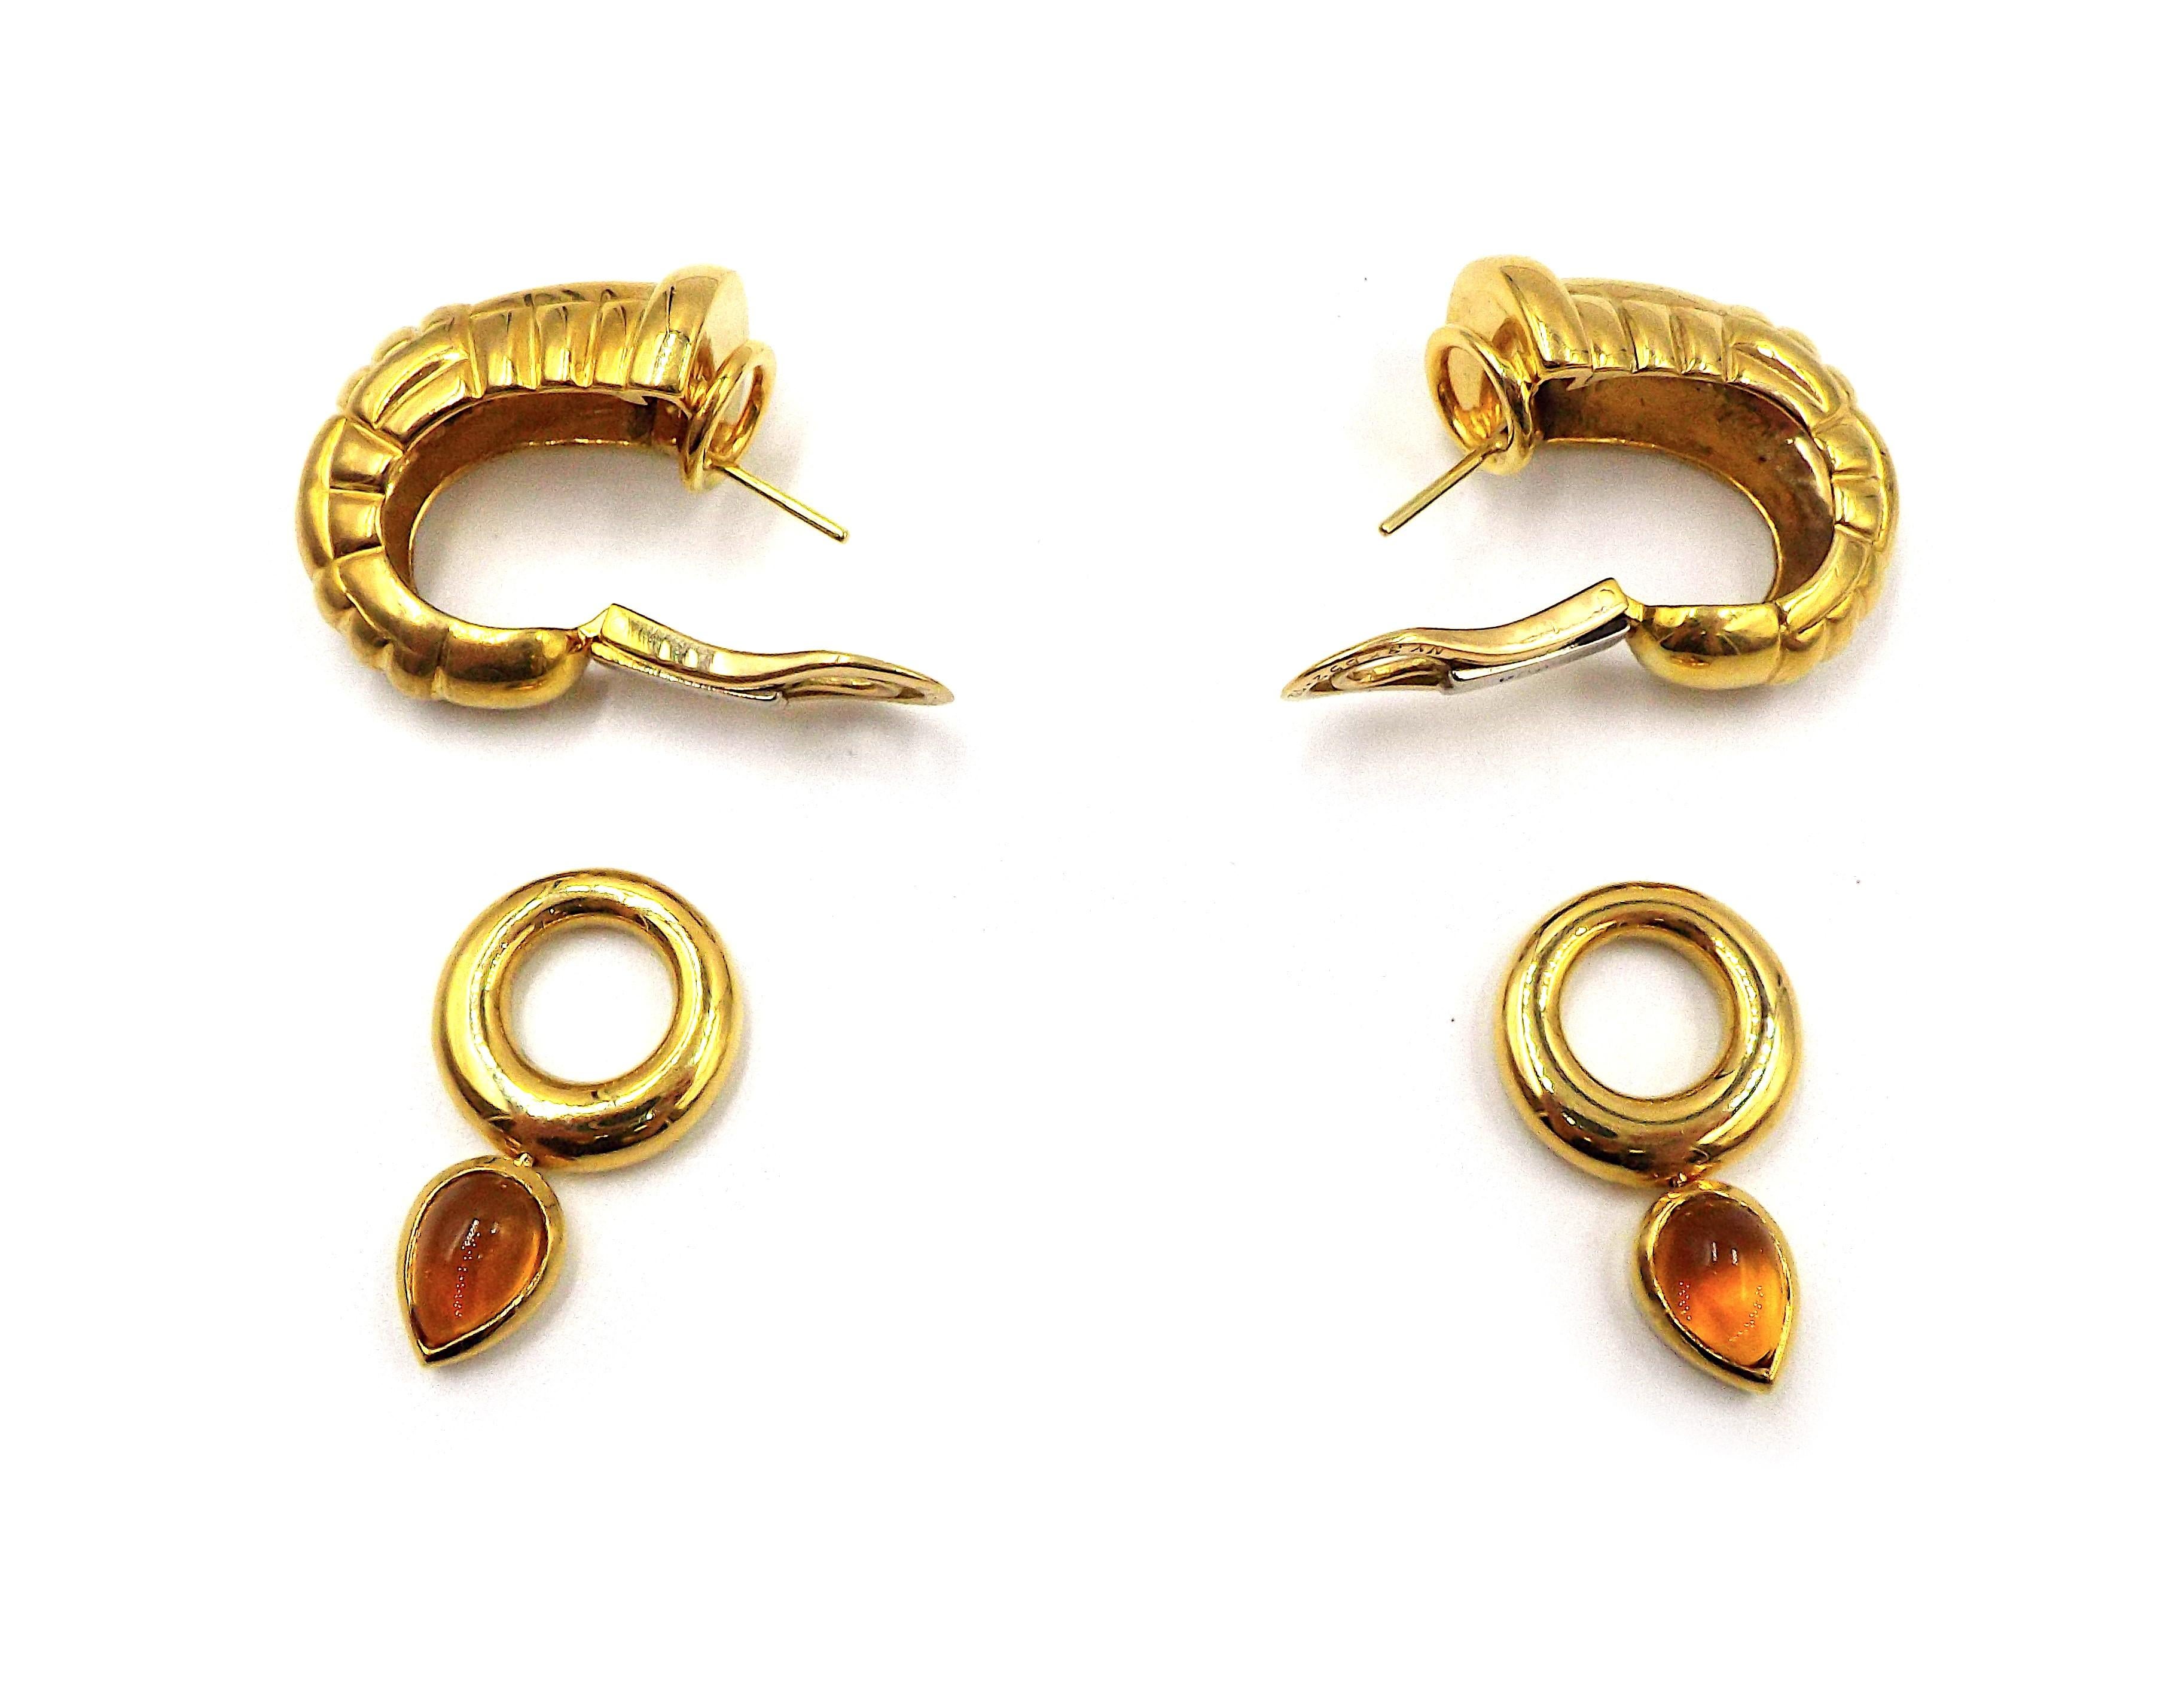 A pair of vintage gold hoop earrings by Van Cleef & Arpels. Smaller hoops with pear-shaped cabochon citrines are removable. Each earring weighs 14 grams, dimensions are 1 5/8